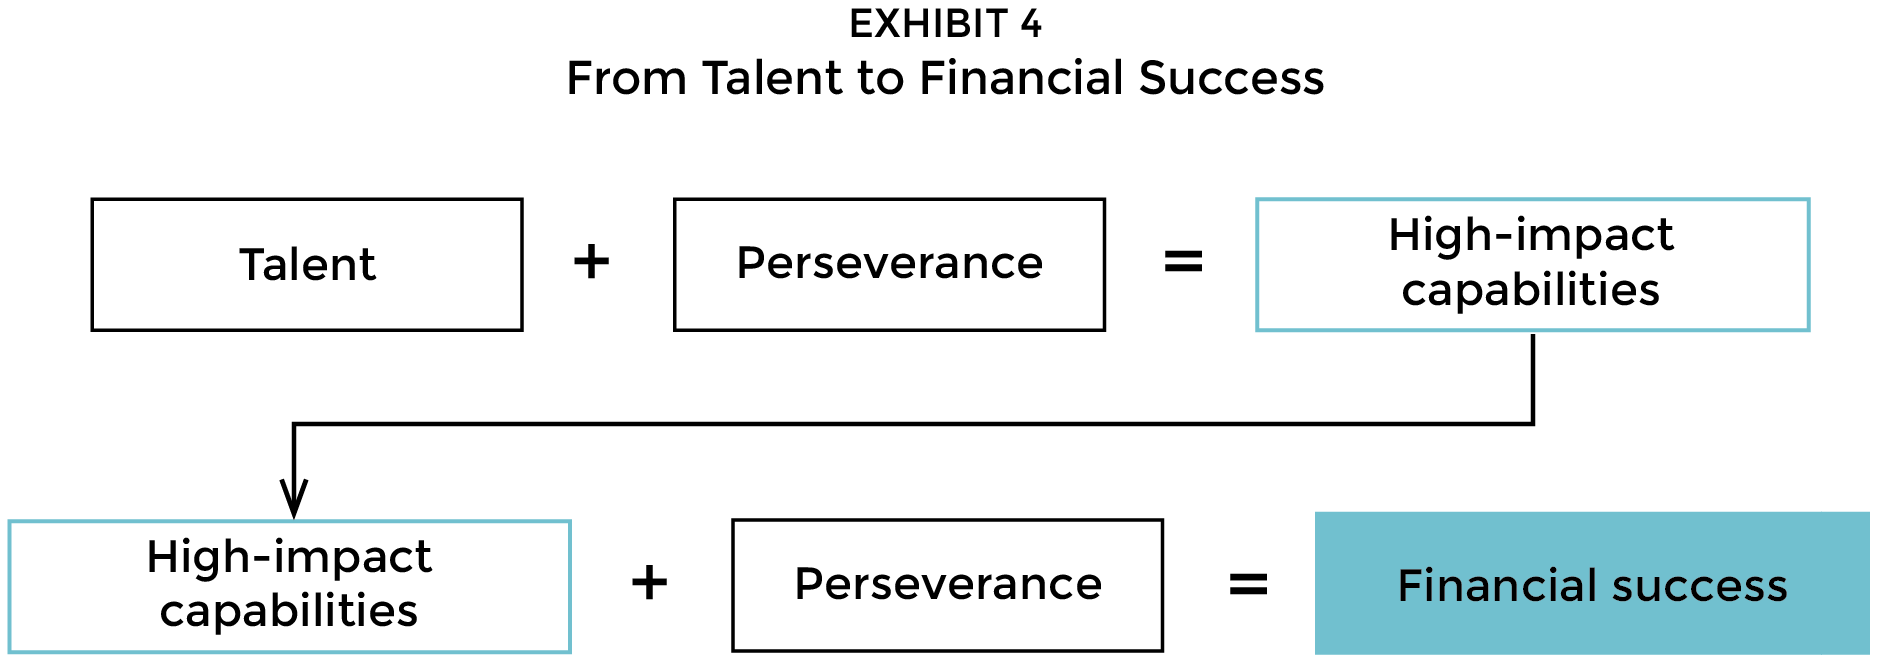 From talent to financial success